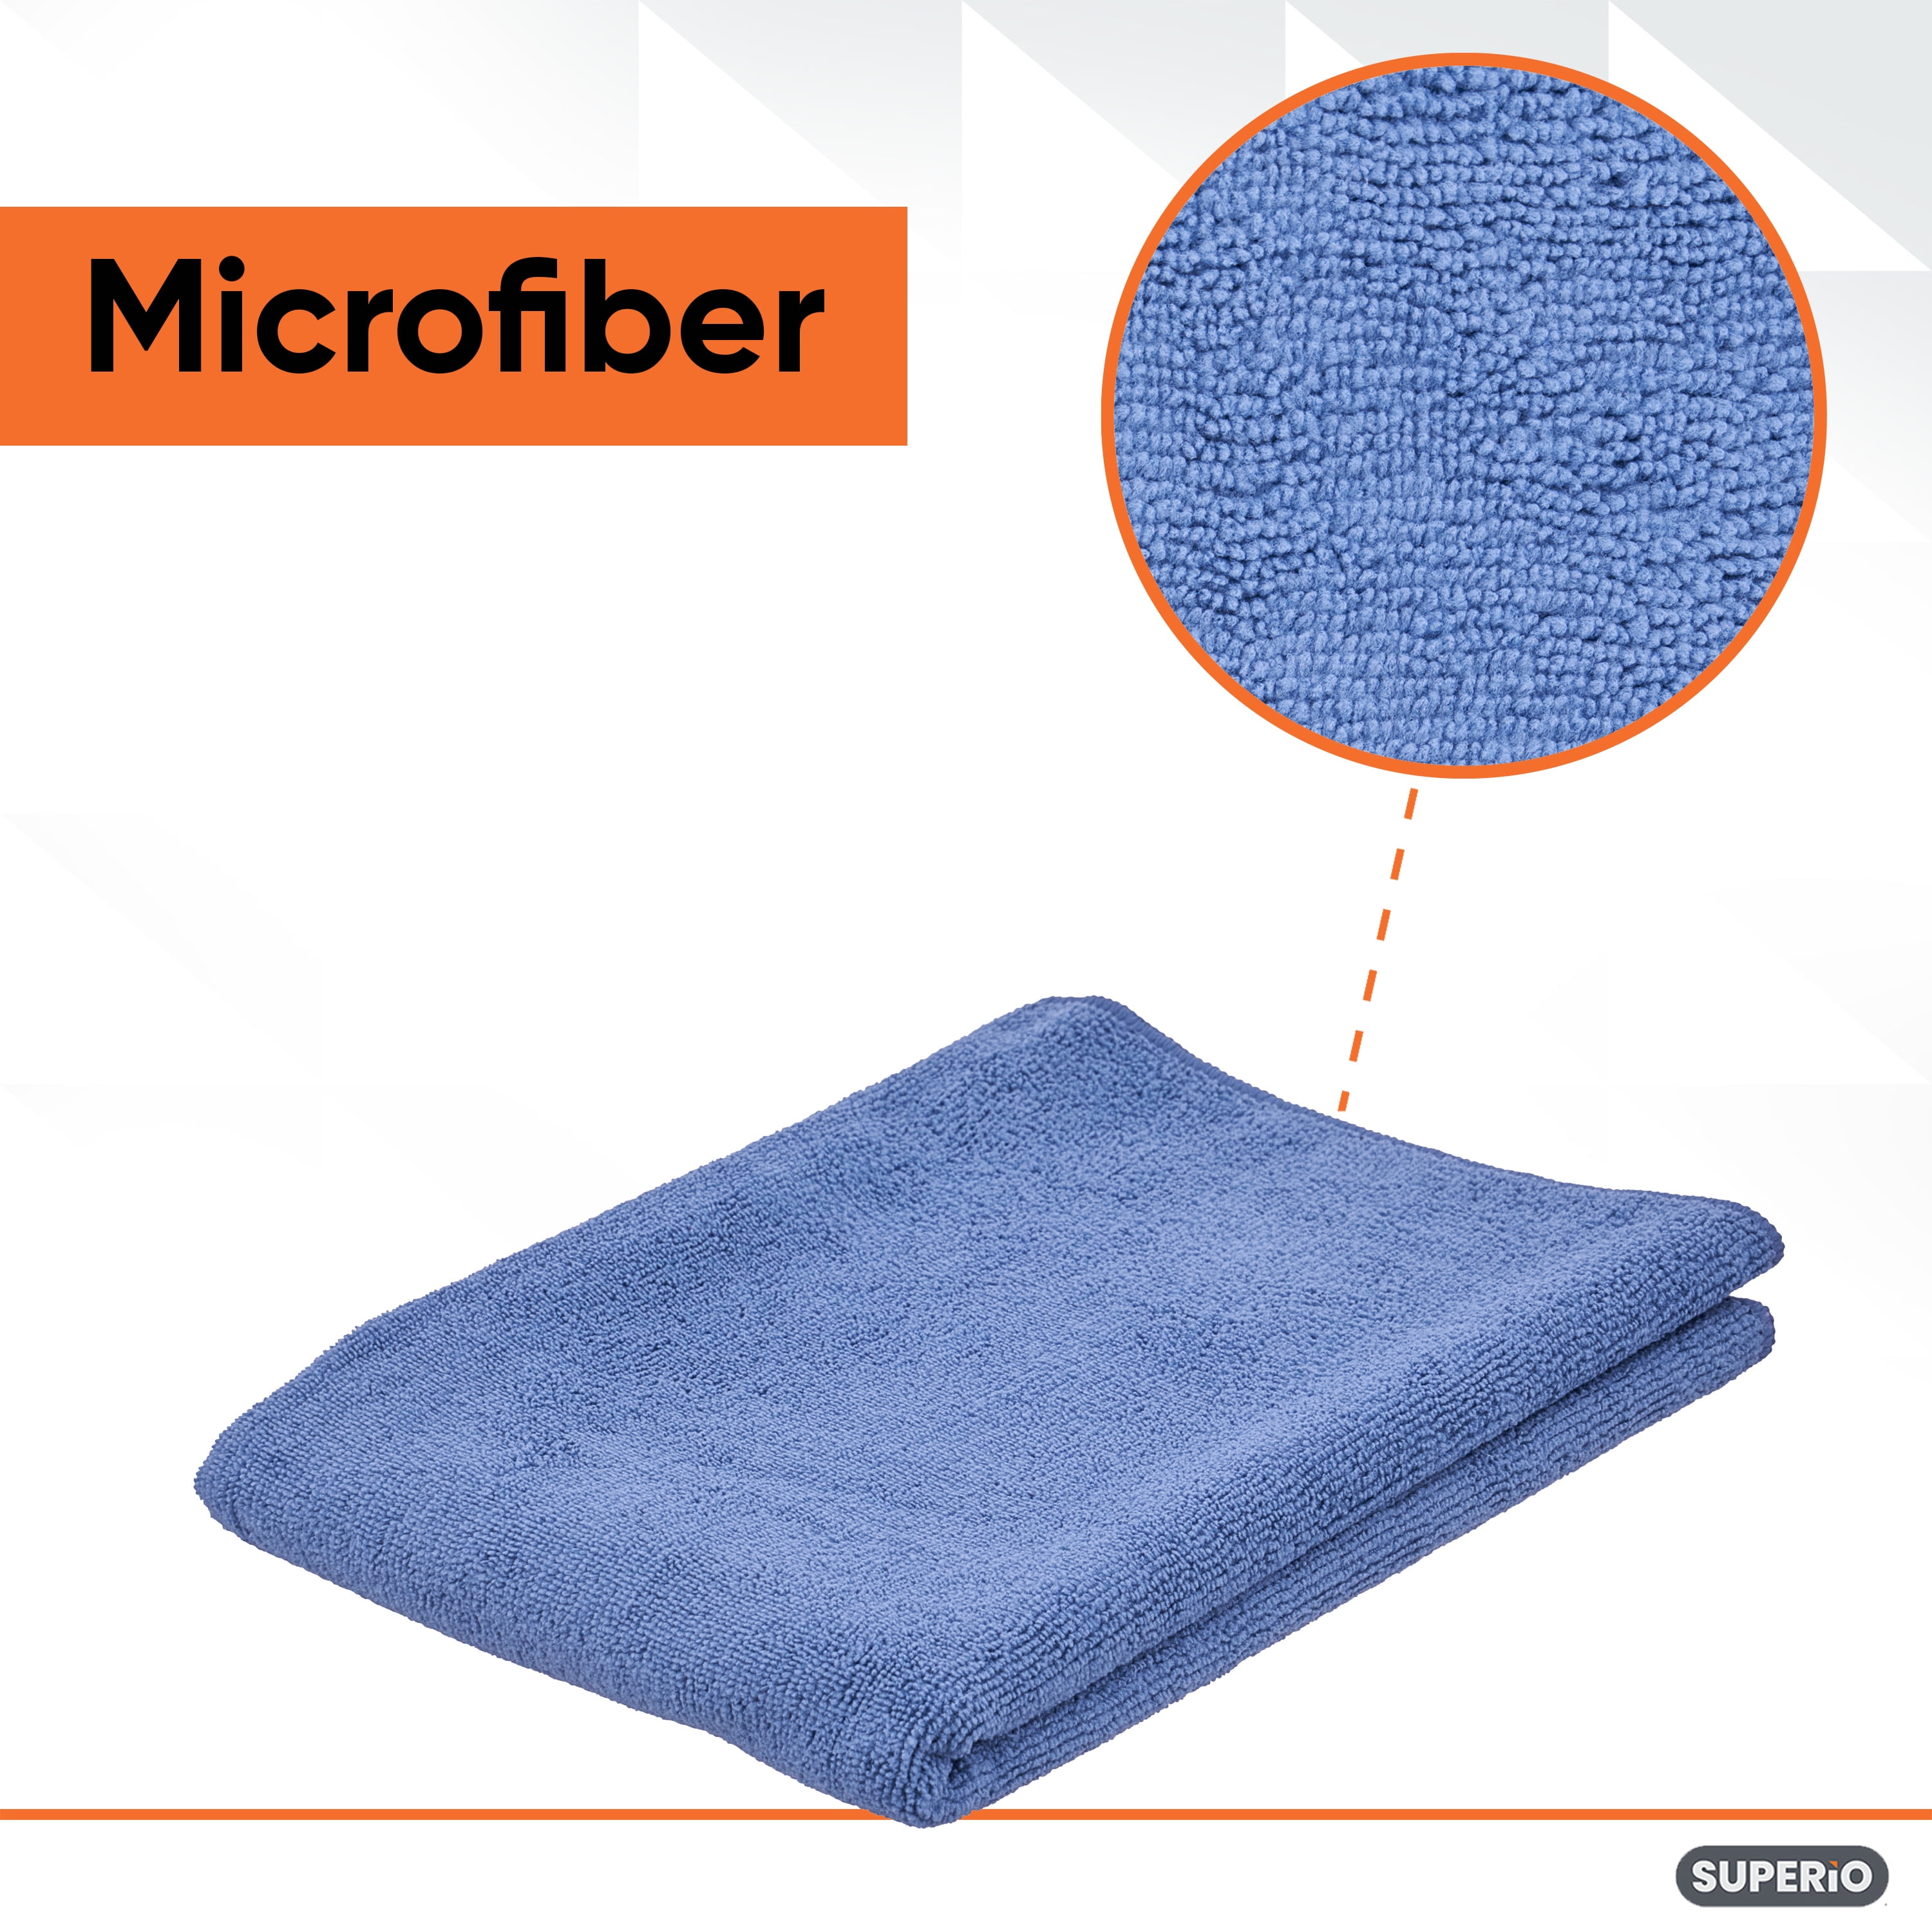 XL Microfiber Cleaning Towel – 30 Pack - Extra-large Microfiber Cleaning  Towel